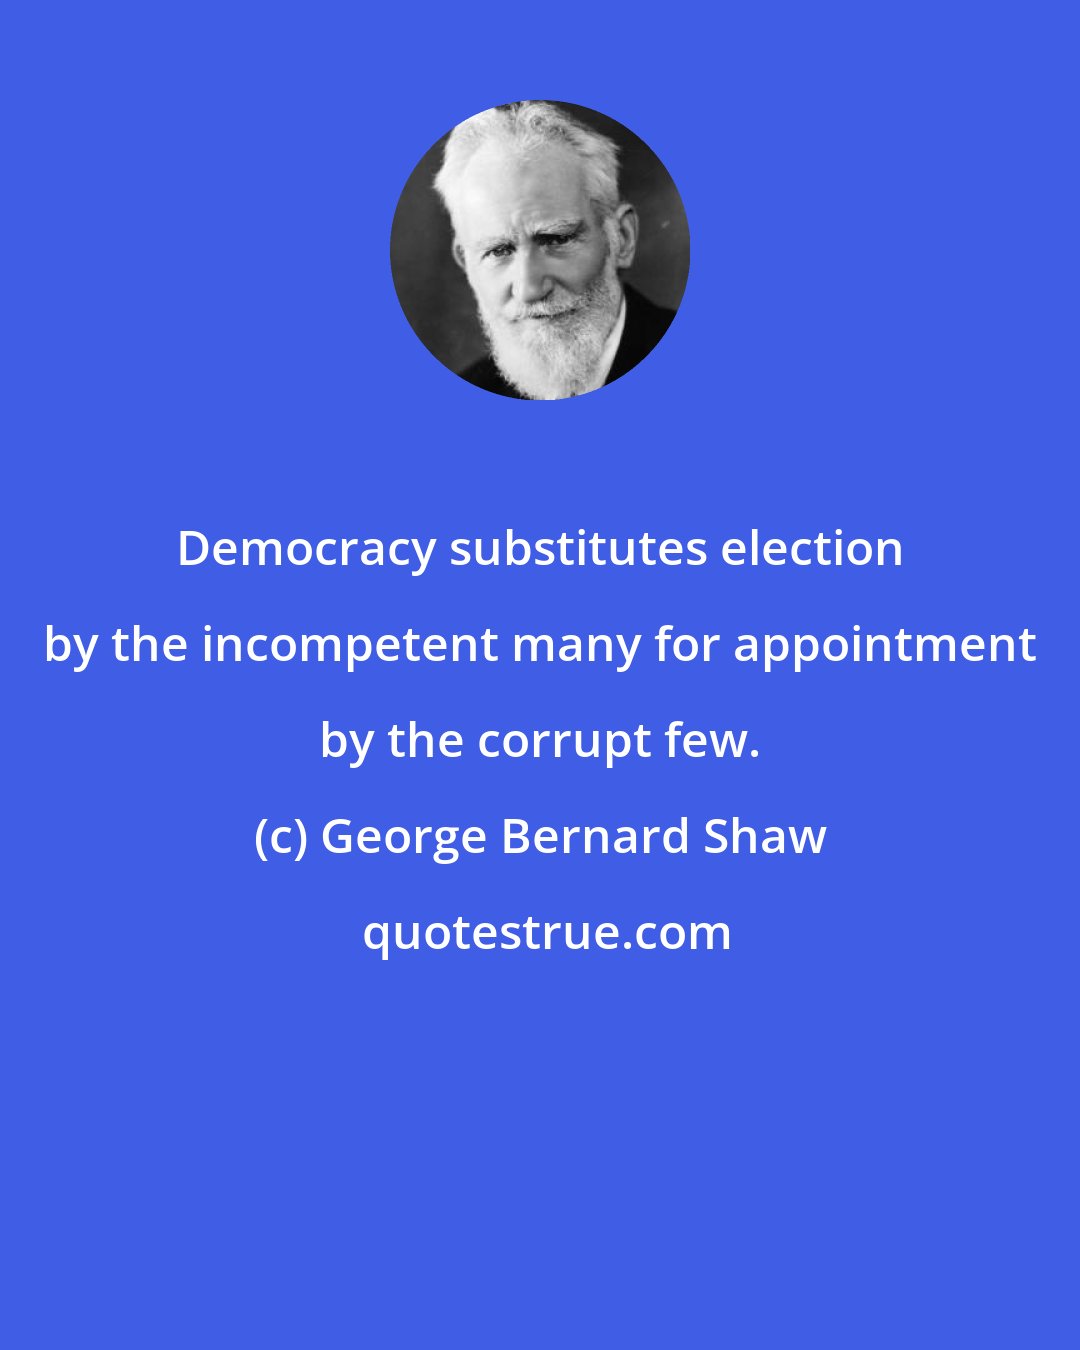 George Bernard Shaw: Democracy substitutes election by the incompetent many for appointment by the corrupt few.